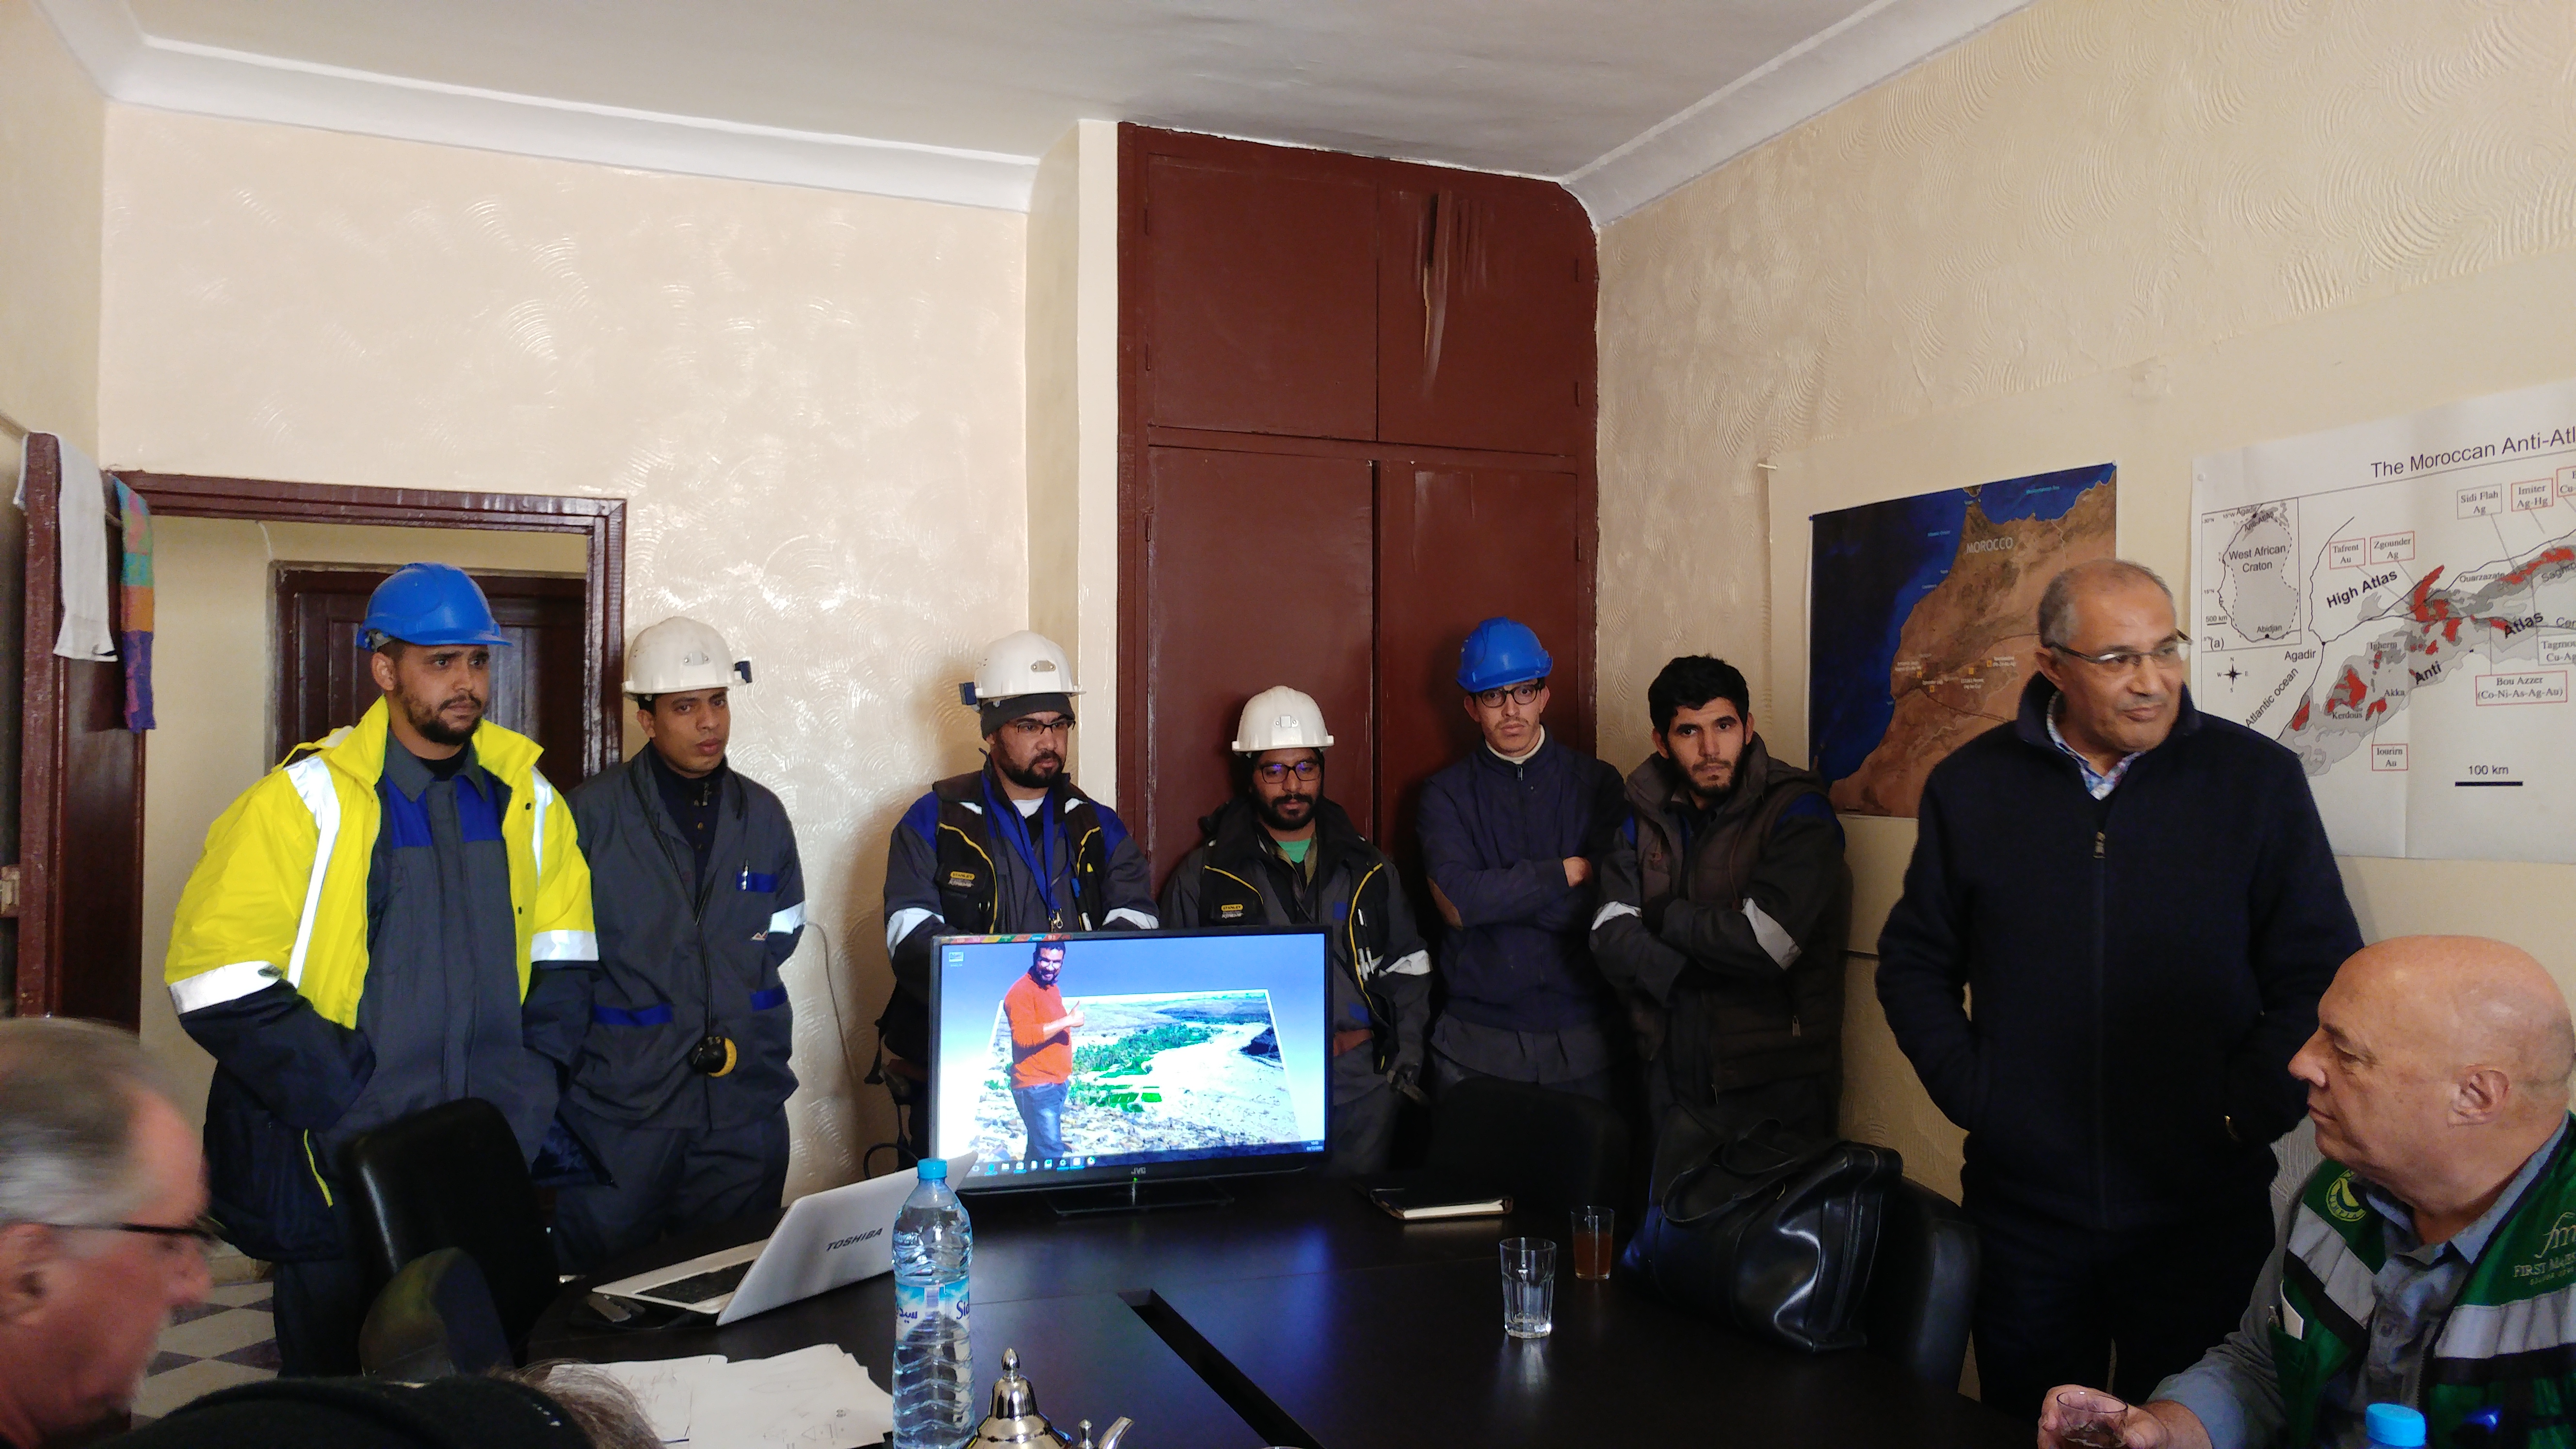 Presentation at the Zgrounder mining office